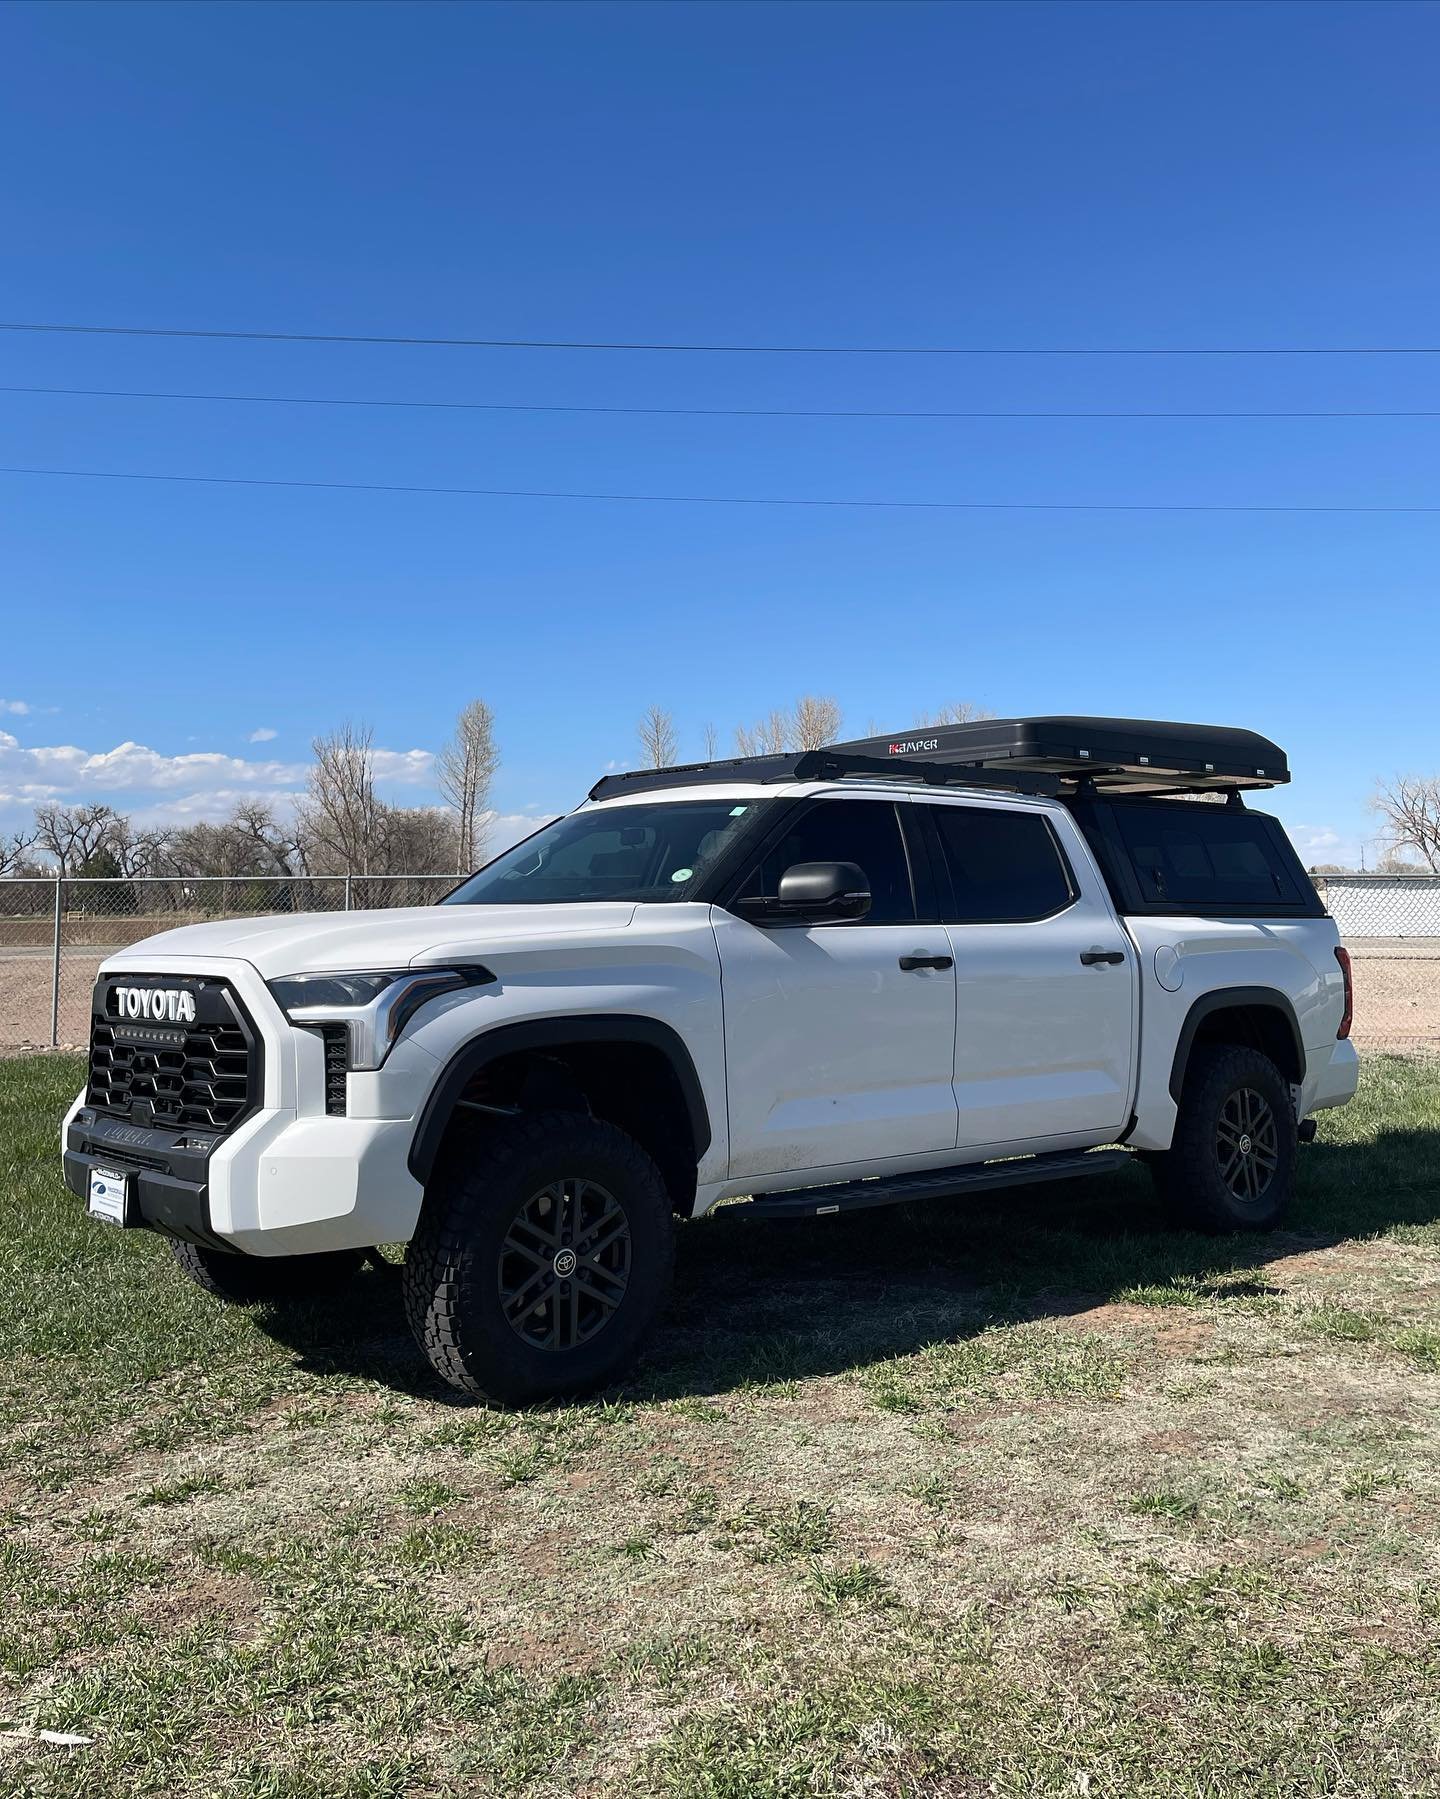 This new Tundra gets better every time we see it! First we did the SmartCap EVO Sport with Rhino-Rack and customer&rsquo;s iKamper, then a custom grill replacement, and last the Front Runner Slimsport platform rack on the cab with the Front Runner 40